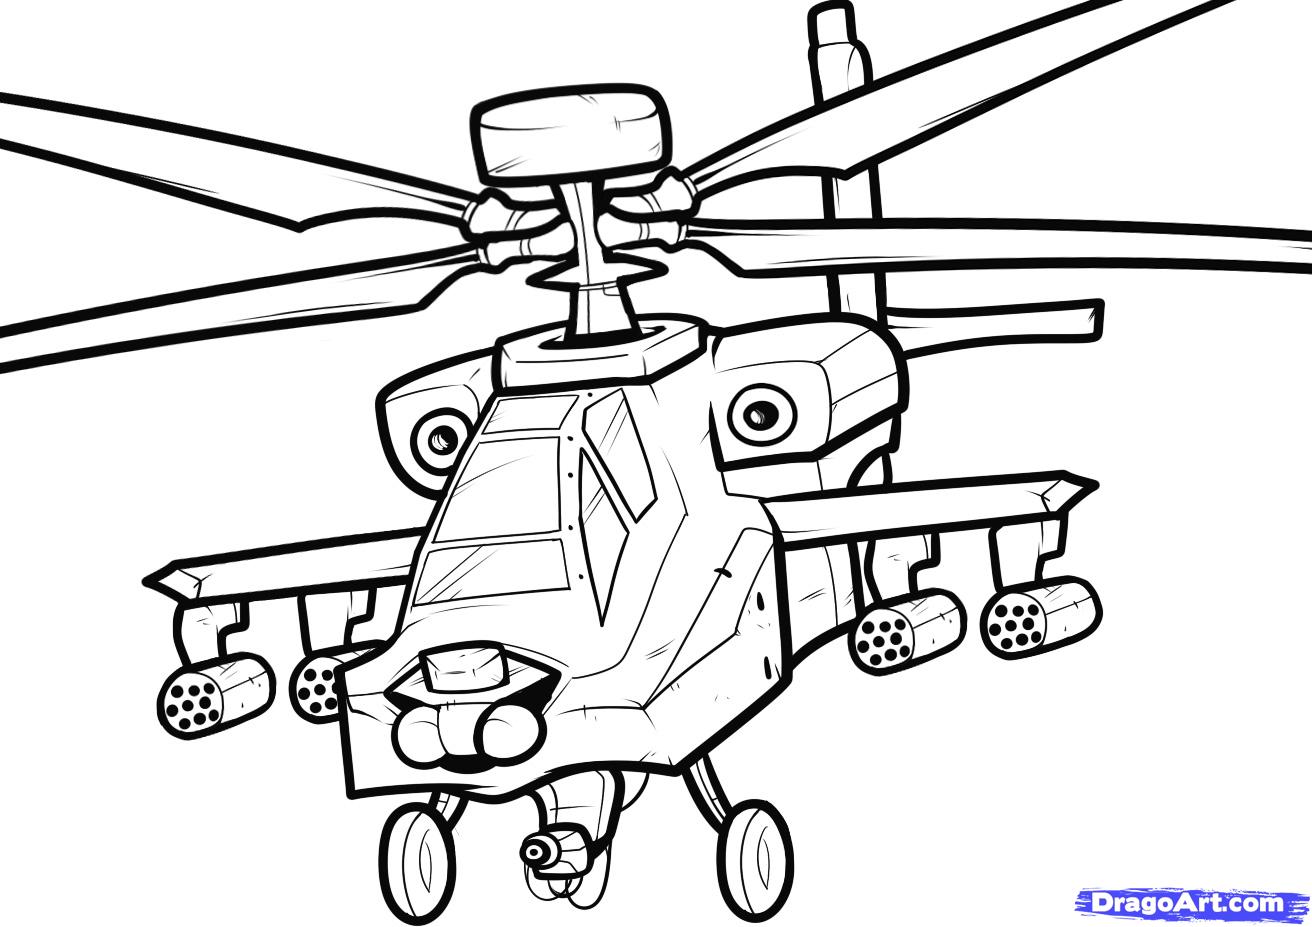 1000+ images about Helicoptero | Toys, Little birds ...